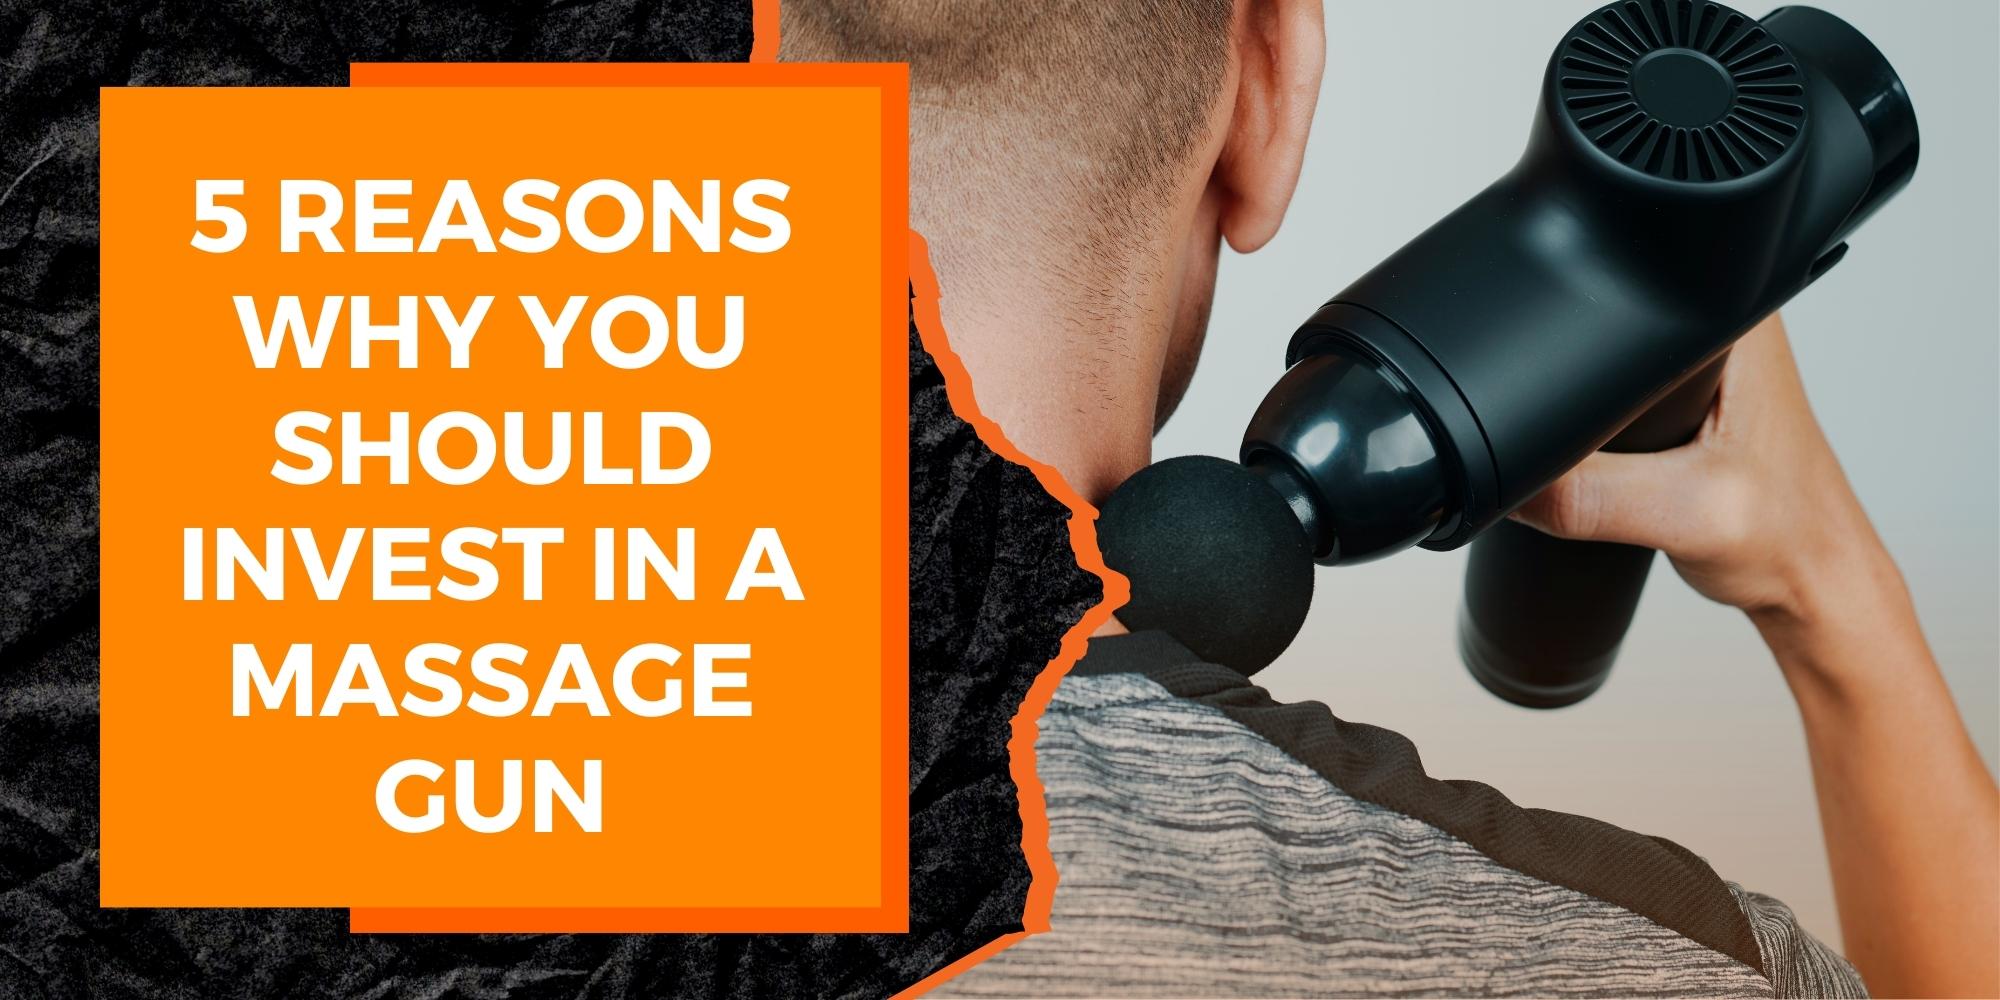 5 Reasons Why You Should Invest in a Massage Gun